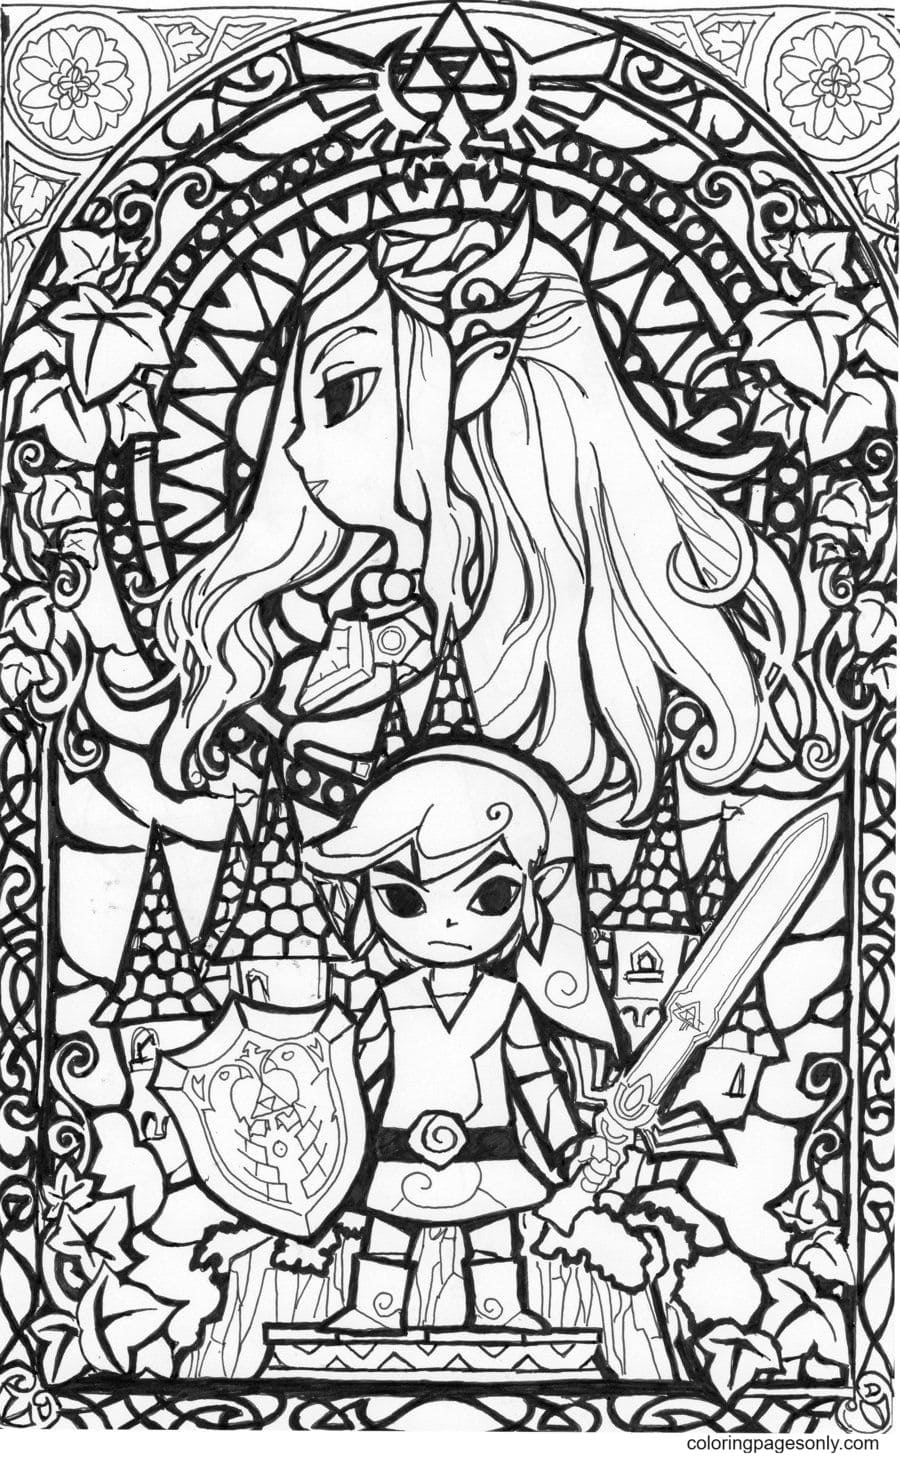 The Legend of Zelda Coloring Pages